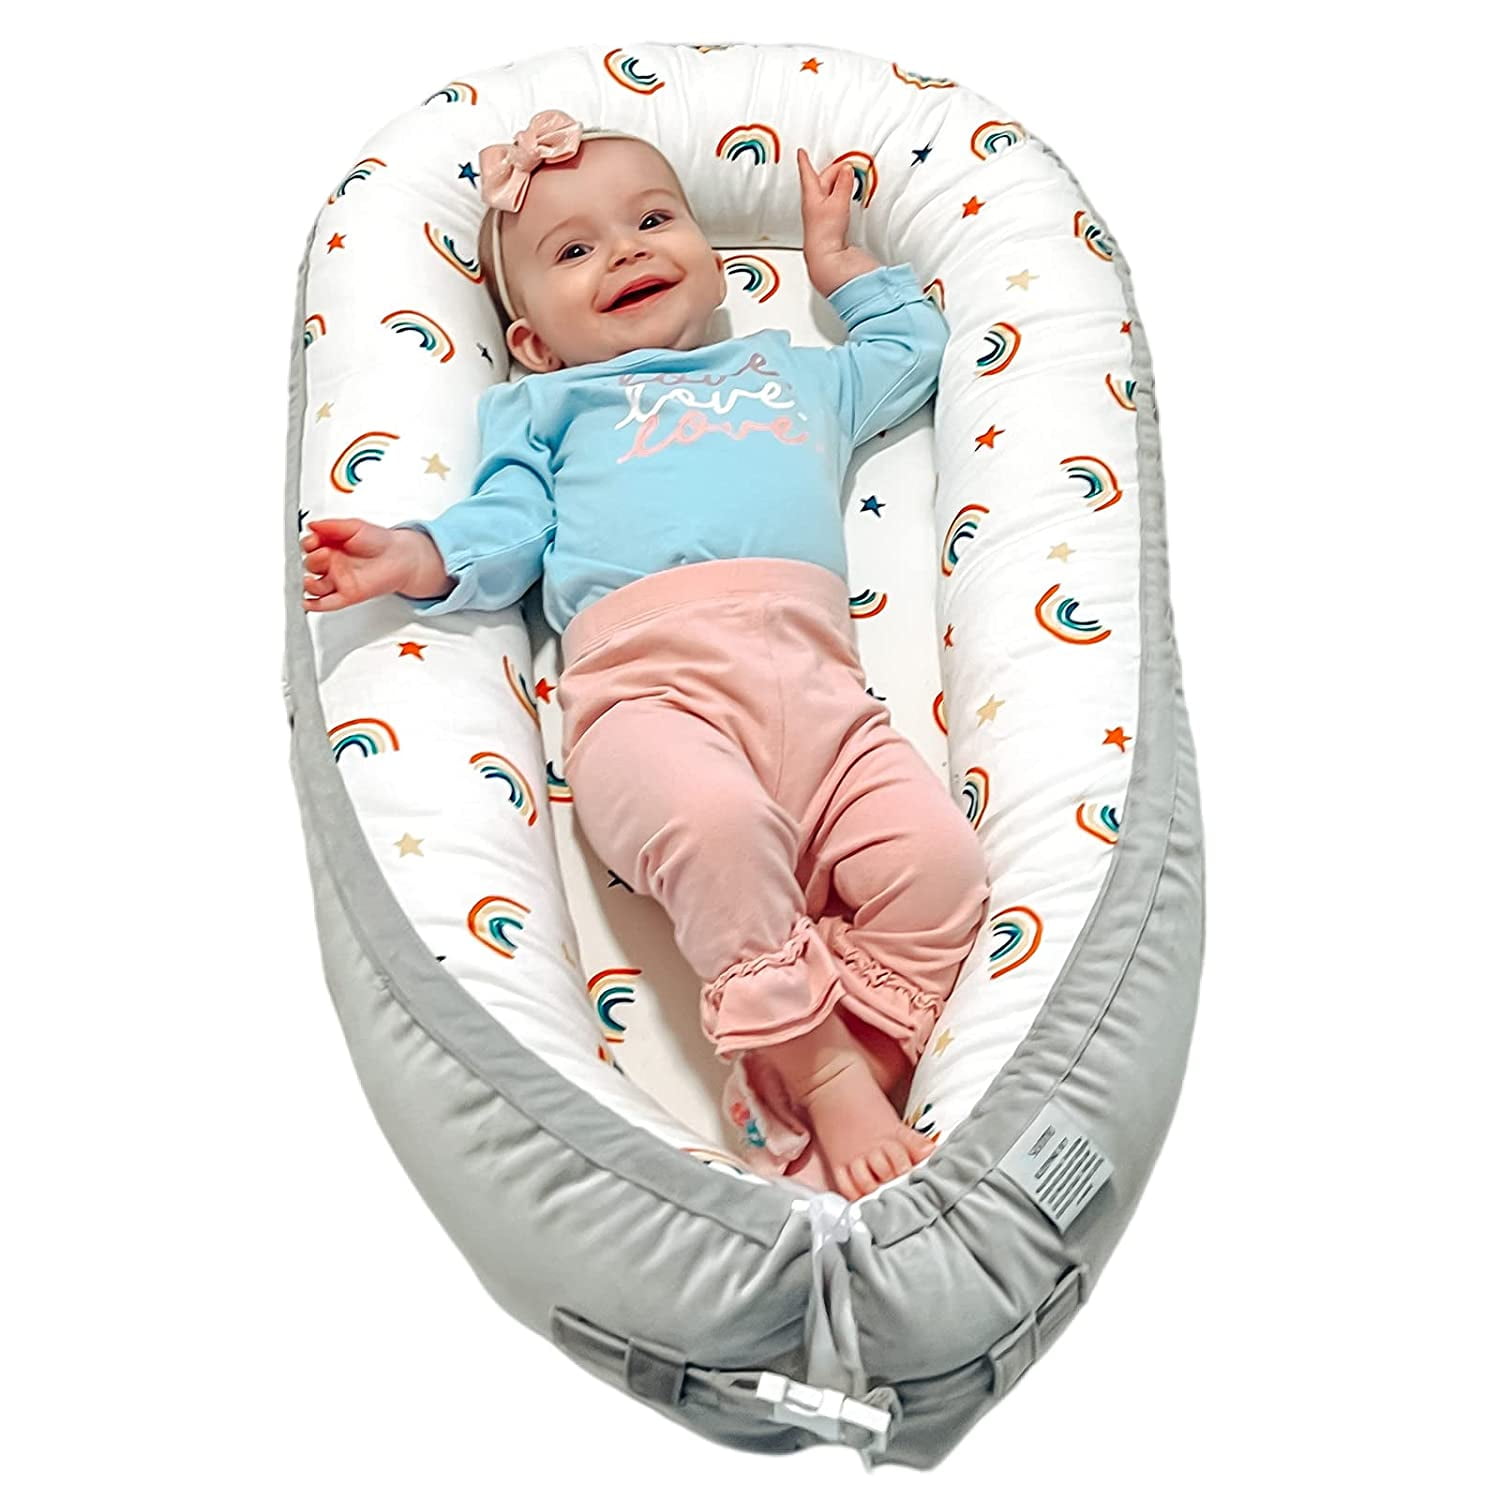 Eaarliyam Baby Recliner Pod Breathable 100% Cotton Detachable Portable Travel Crib with Pillow Comfortable Baby Pillow for Babies 